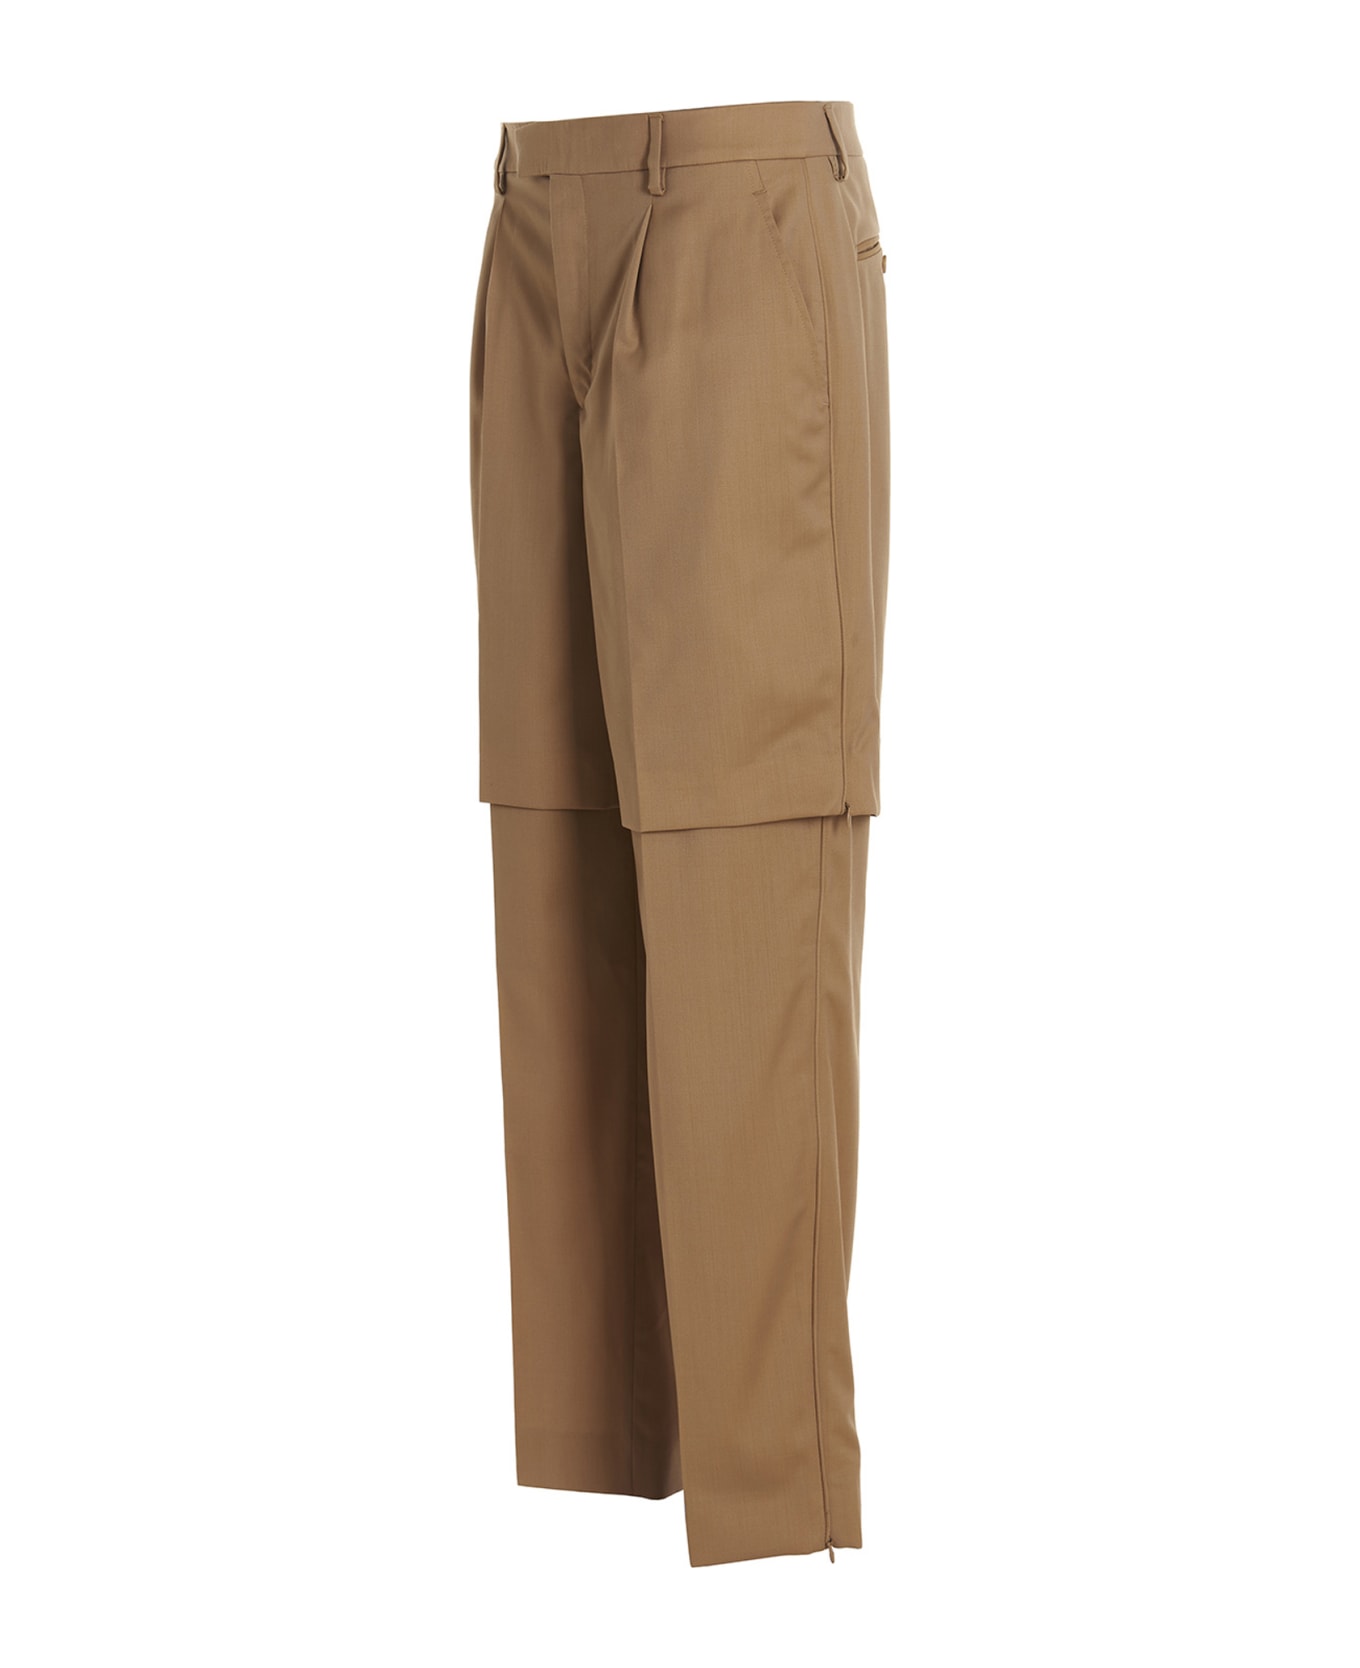 VTMNTS Tailored Pants - Beige ボトムス